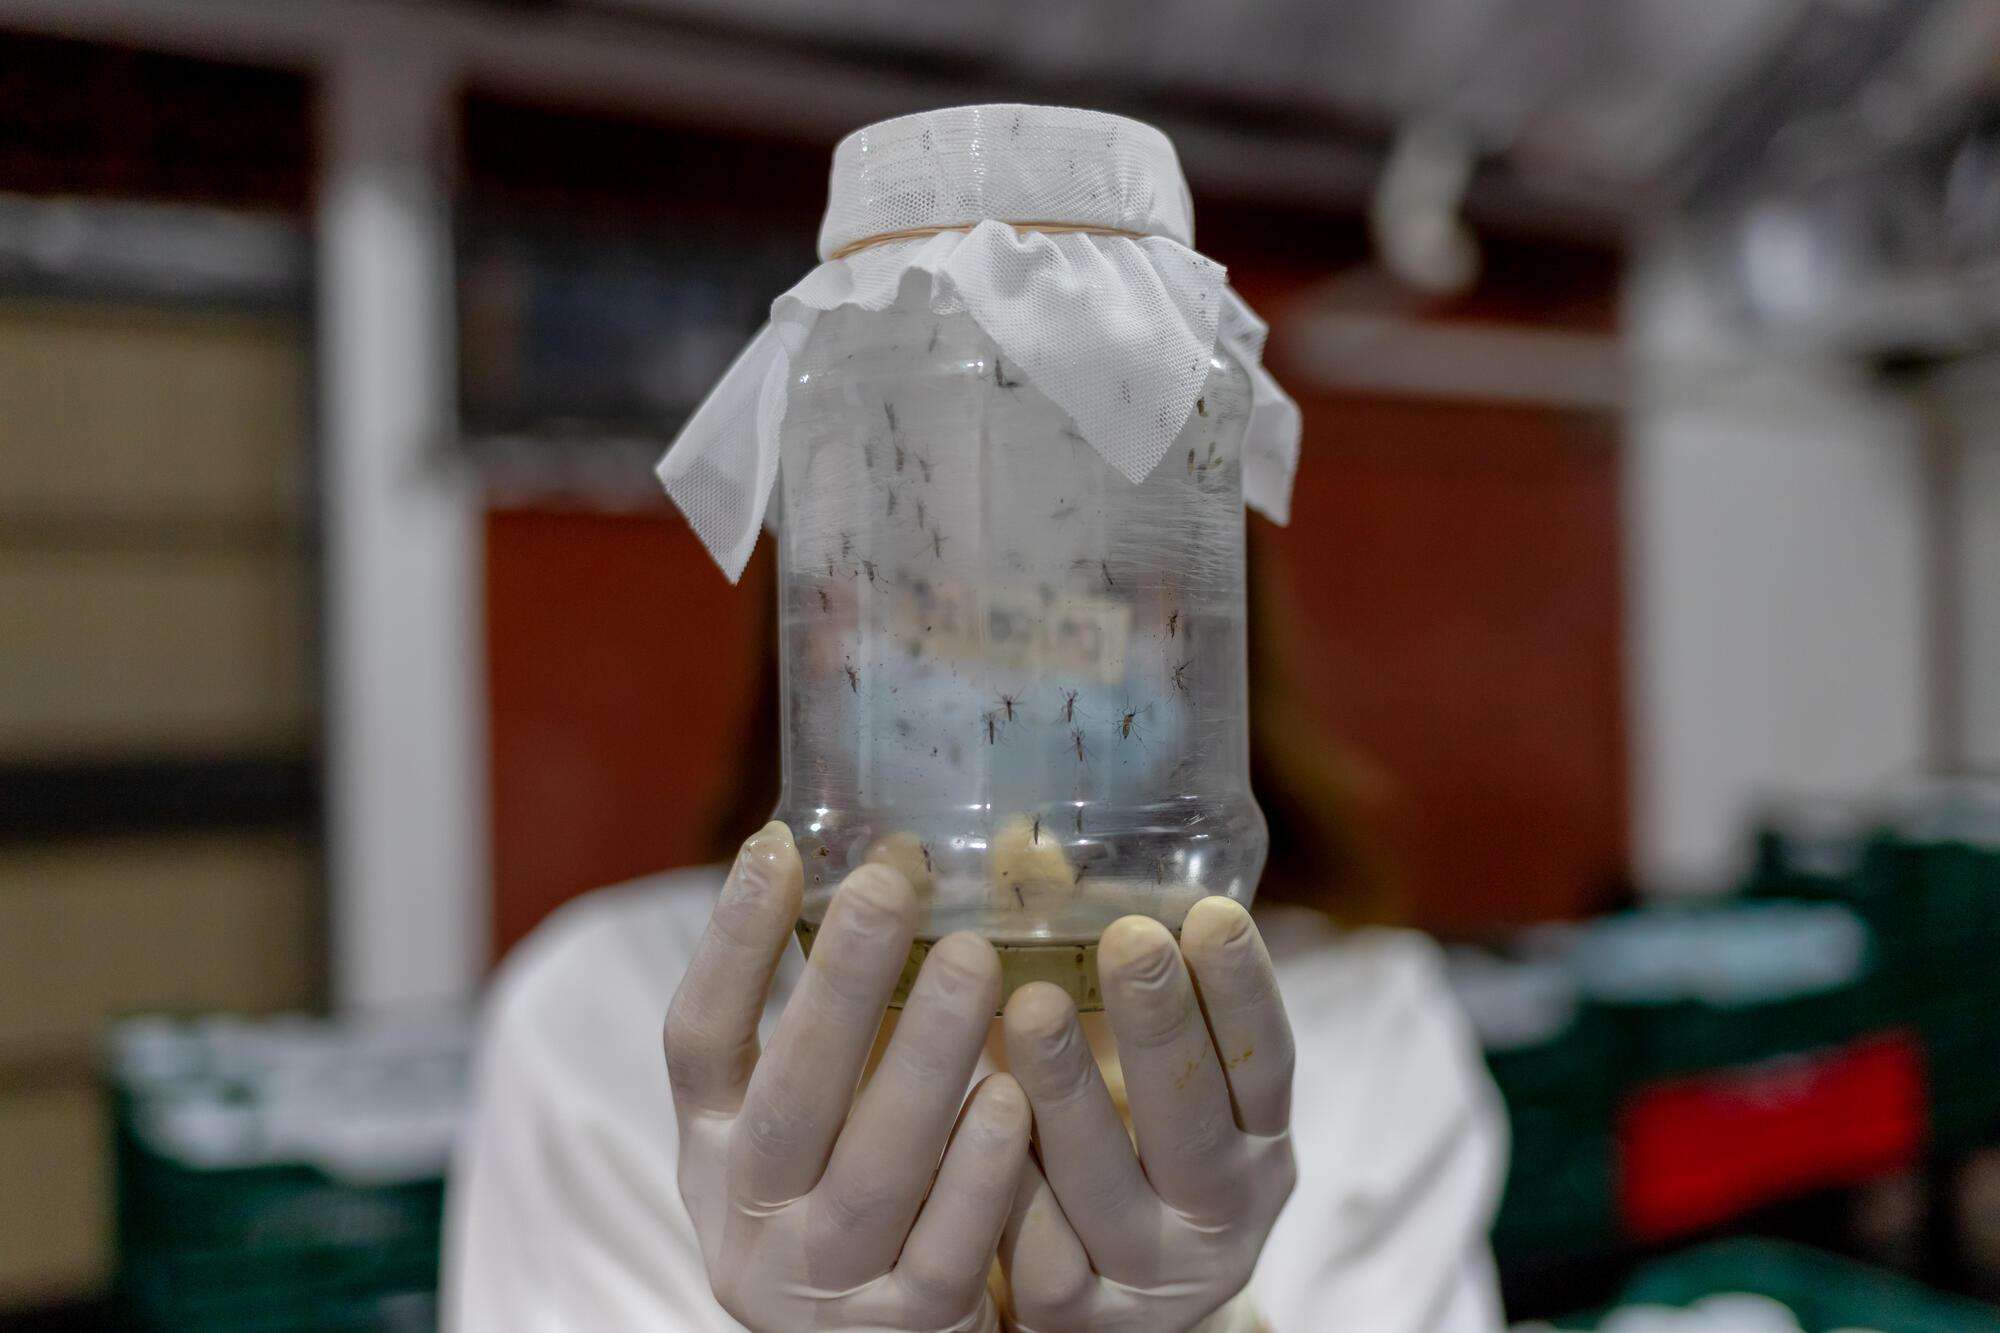 A gloved lab technician is holding a covered jar full of mosquitos, obscuring their face.